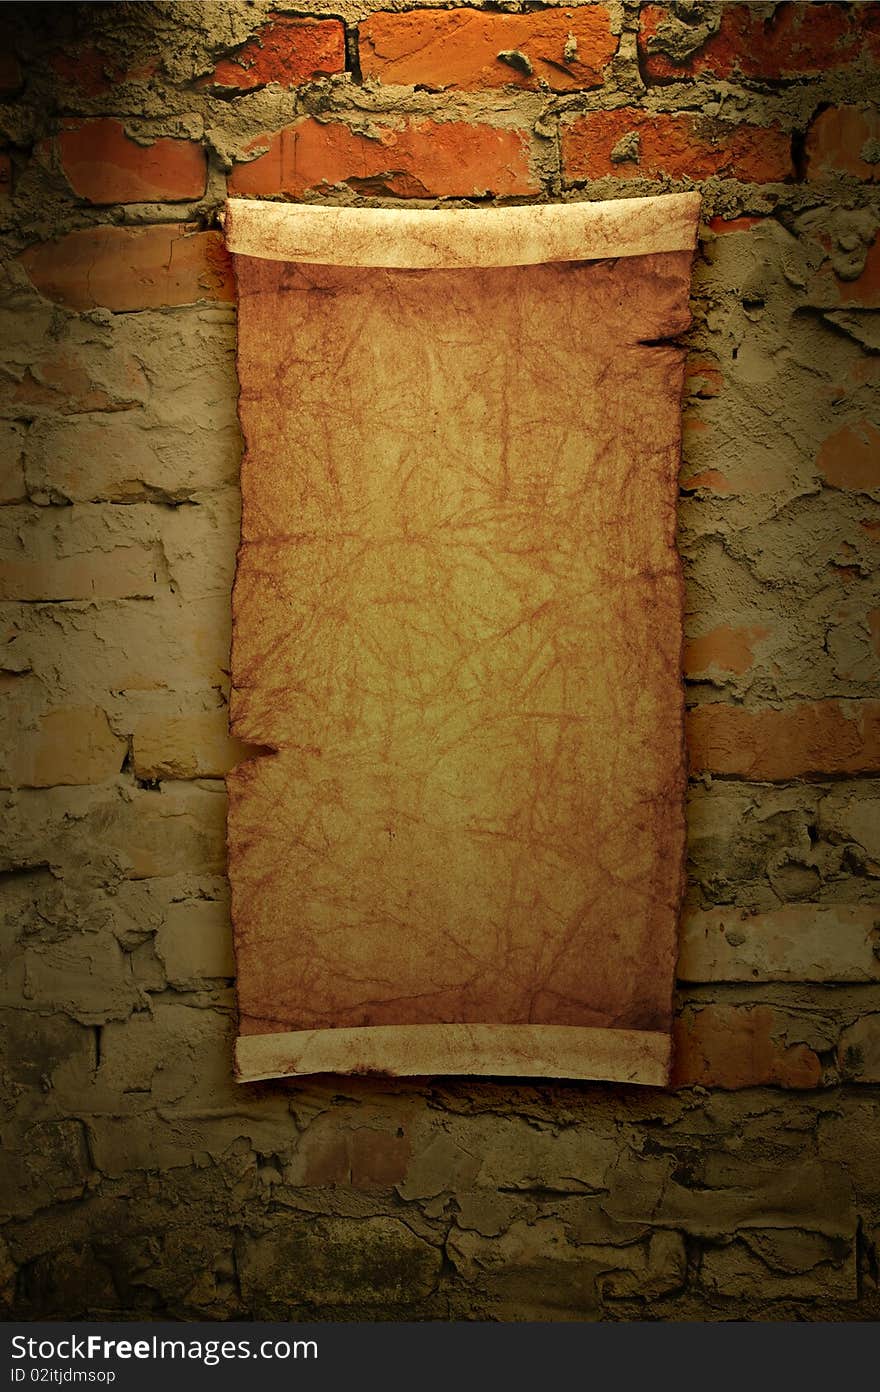 Scroll of old parchment, hanging on the wall grunge